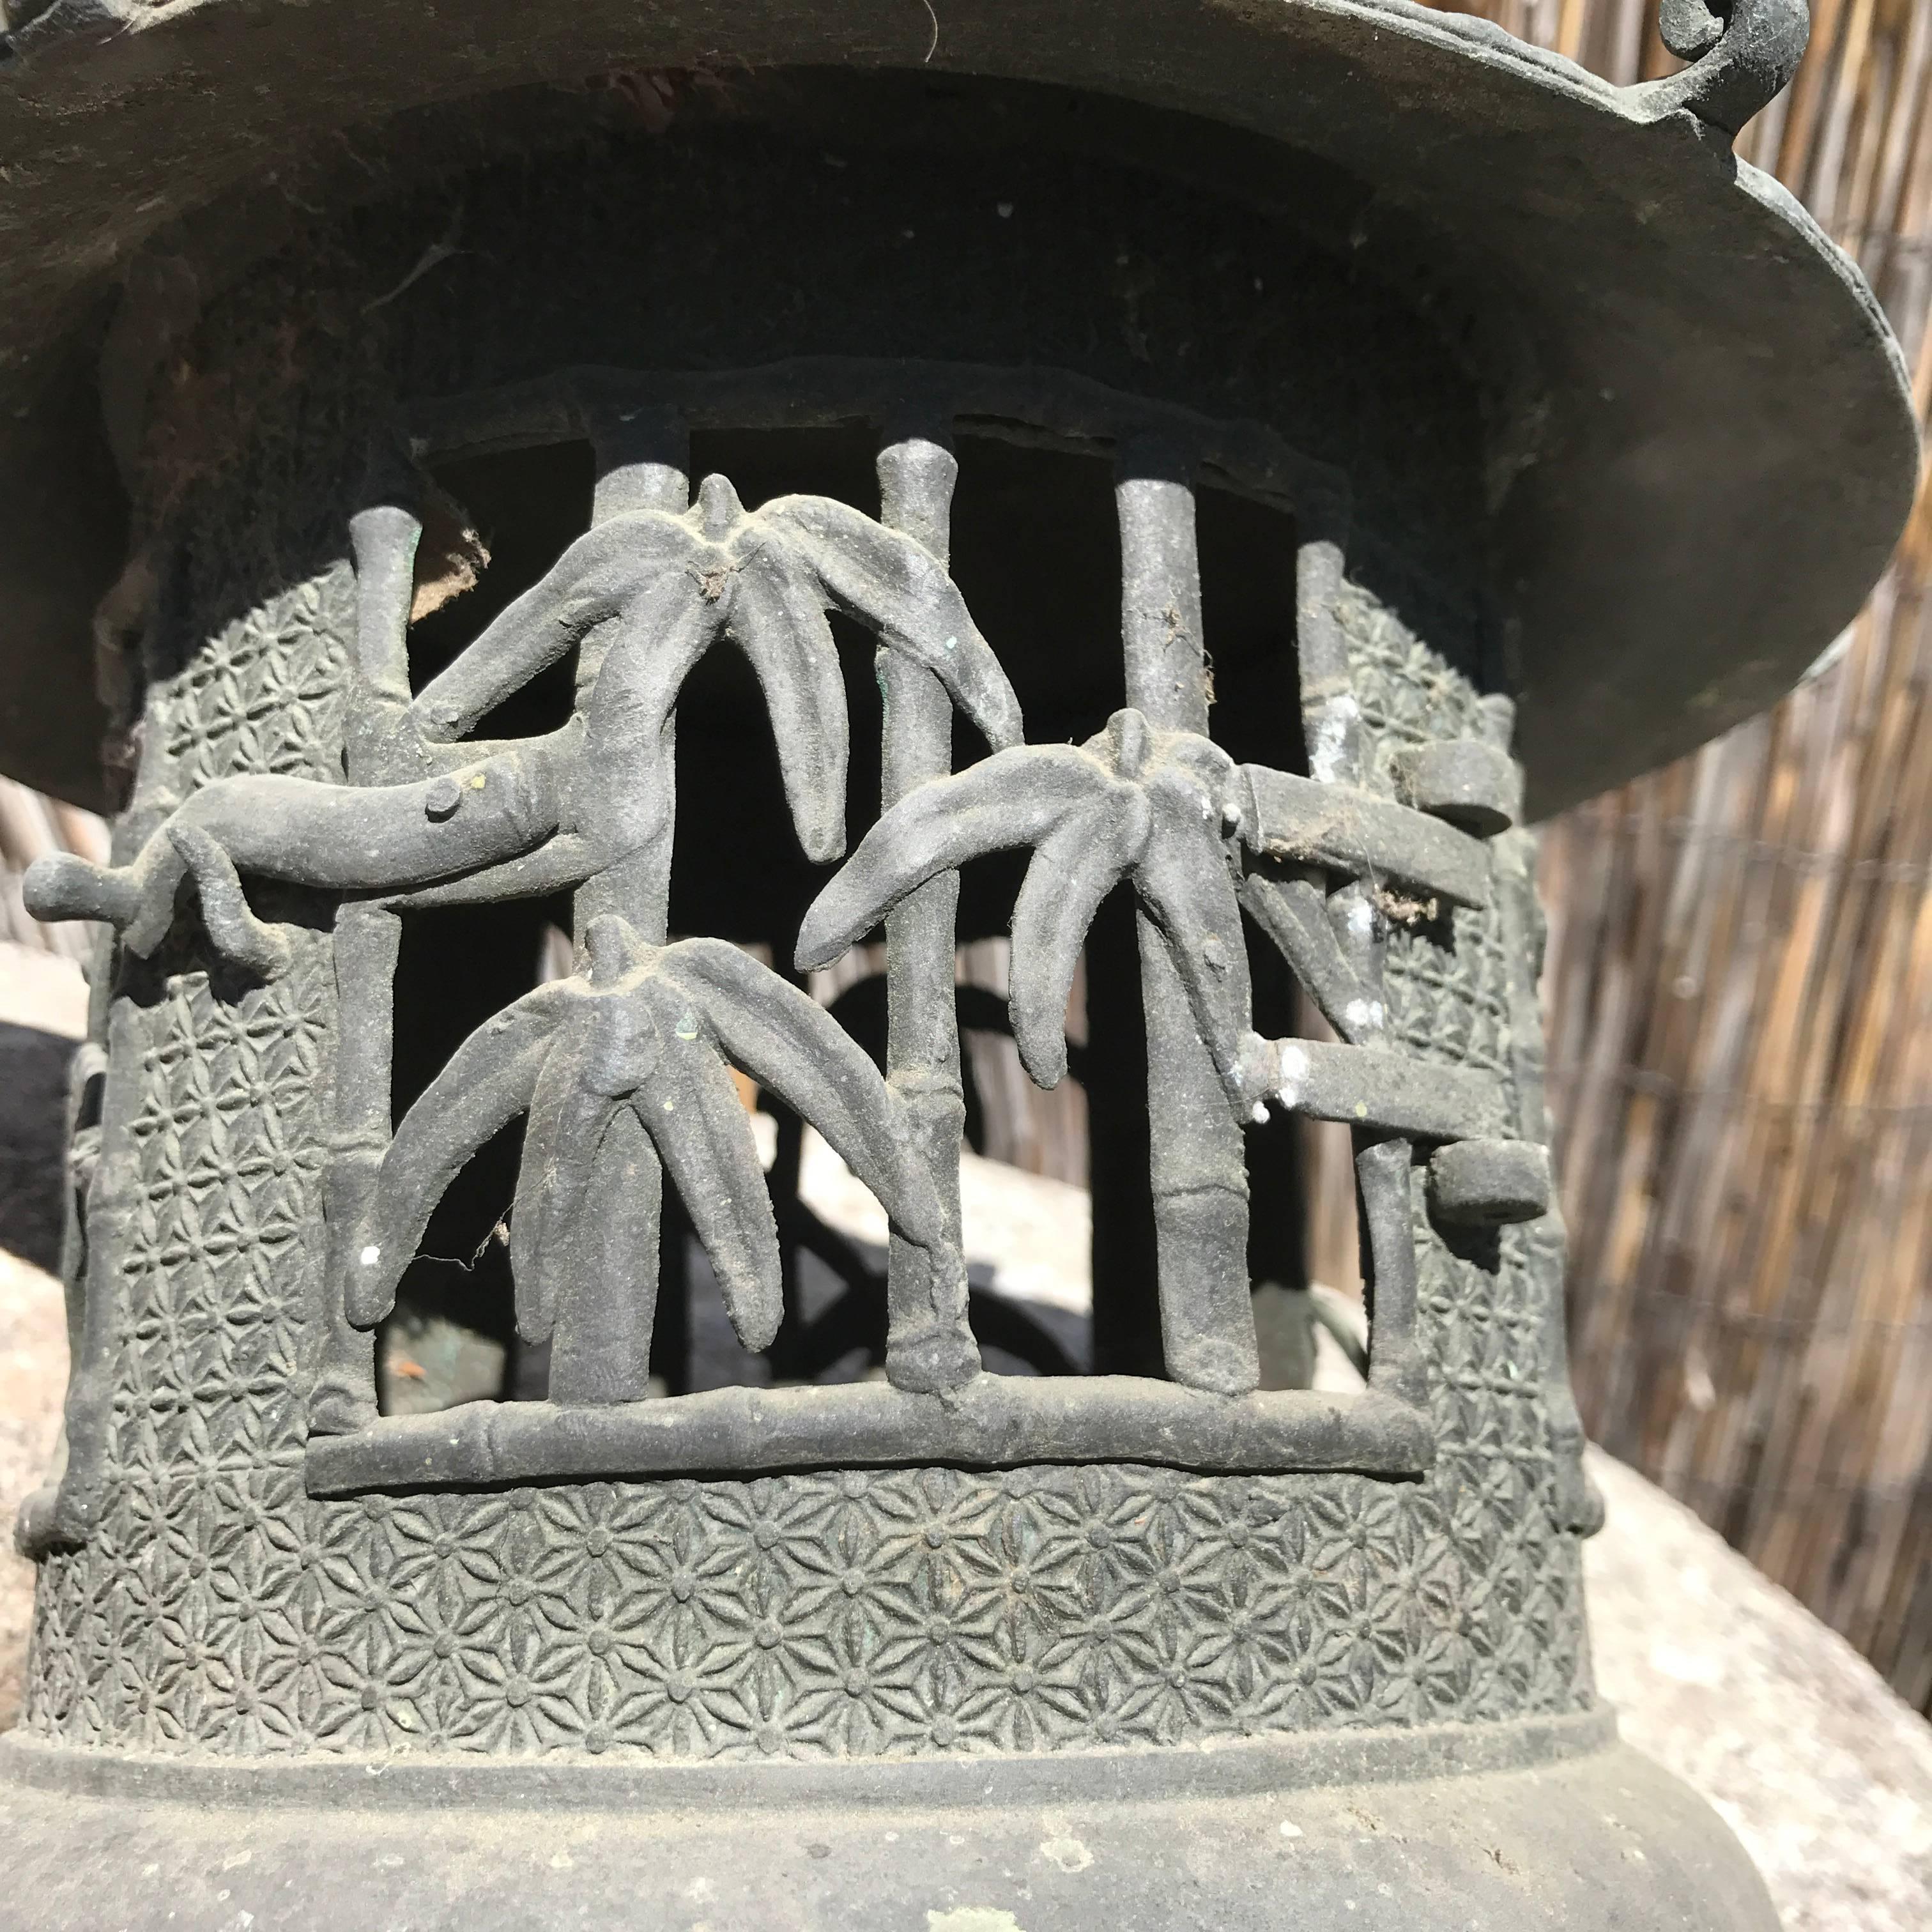 Japan Lantern- enjoy indoors or outdoors
Hand cast in solid bronze with door opening to insert your own candle or oil lamp.

Pine tree and floral designs. 

Beautiful Pagoda form with tightly cast woven pattern roof 

Dimensions: 15 inches tall and